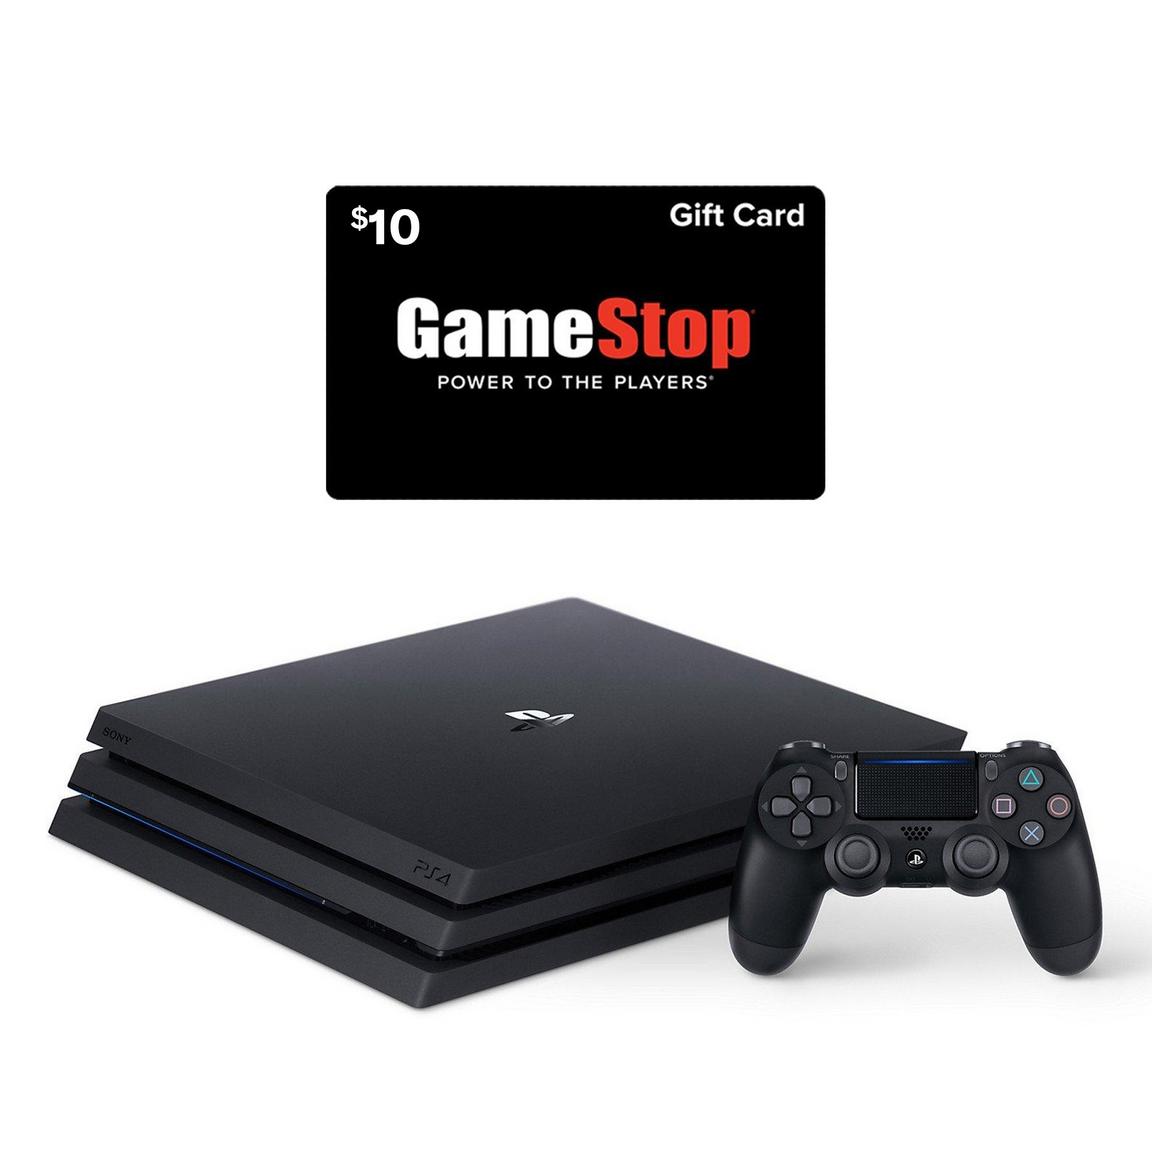 PlayStation 4 Pro System and $10 GameStop Gift Card